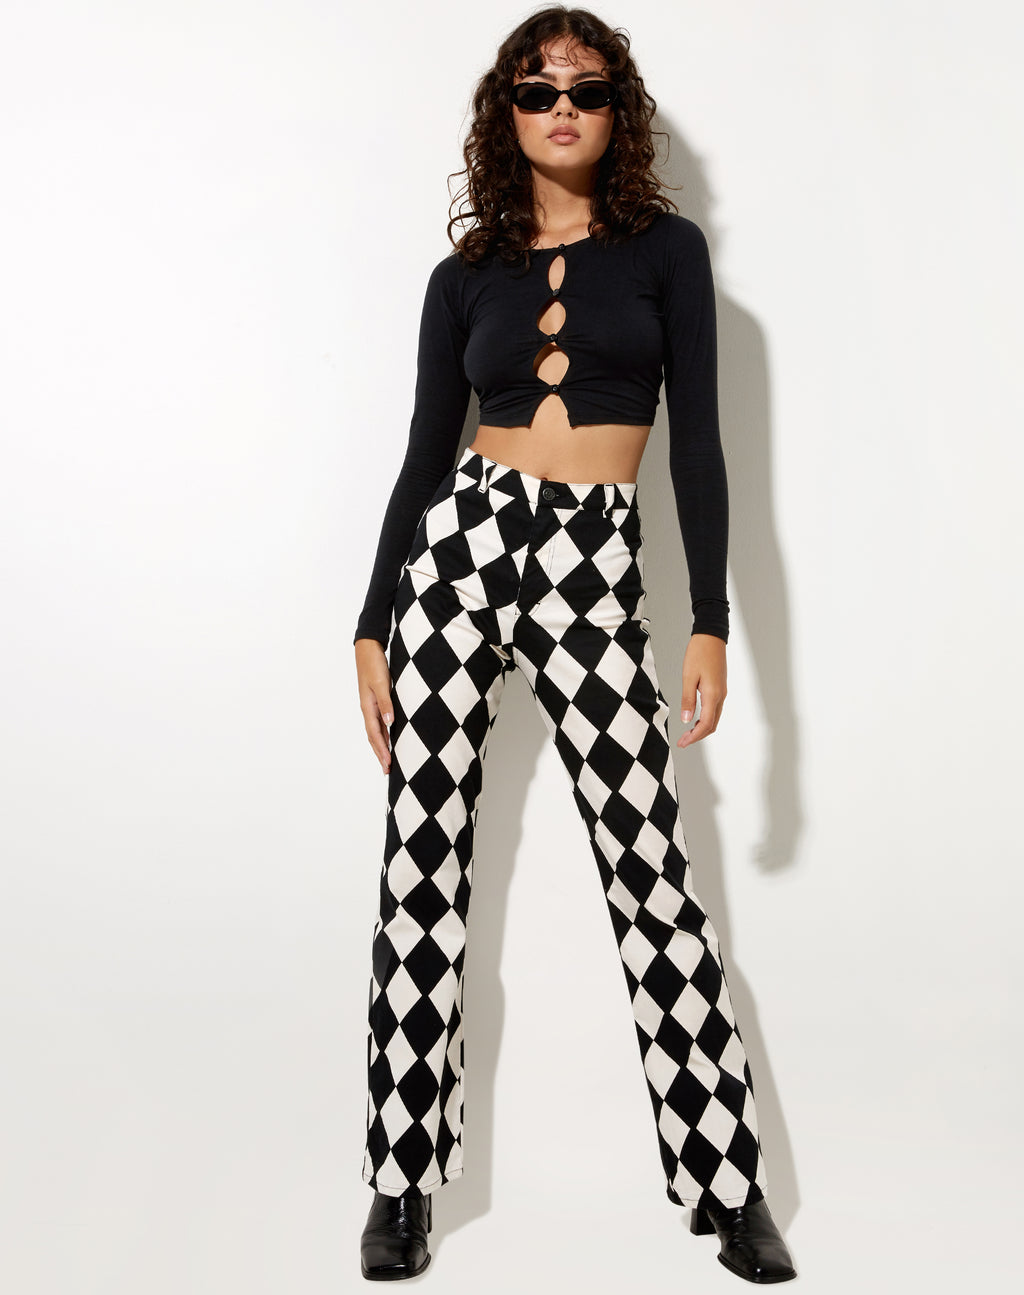 Zoven Flare Trouser in Harlequin Black and White